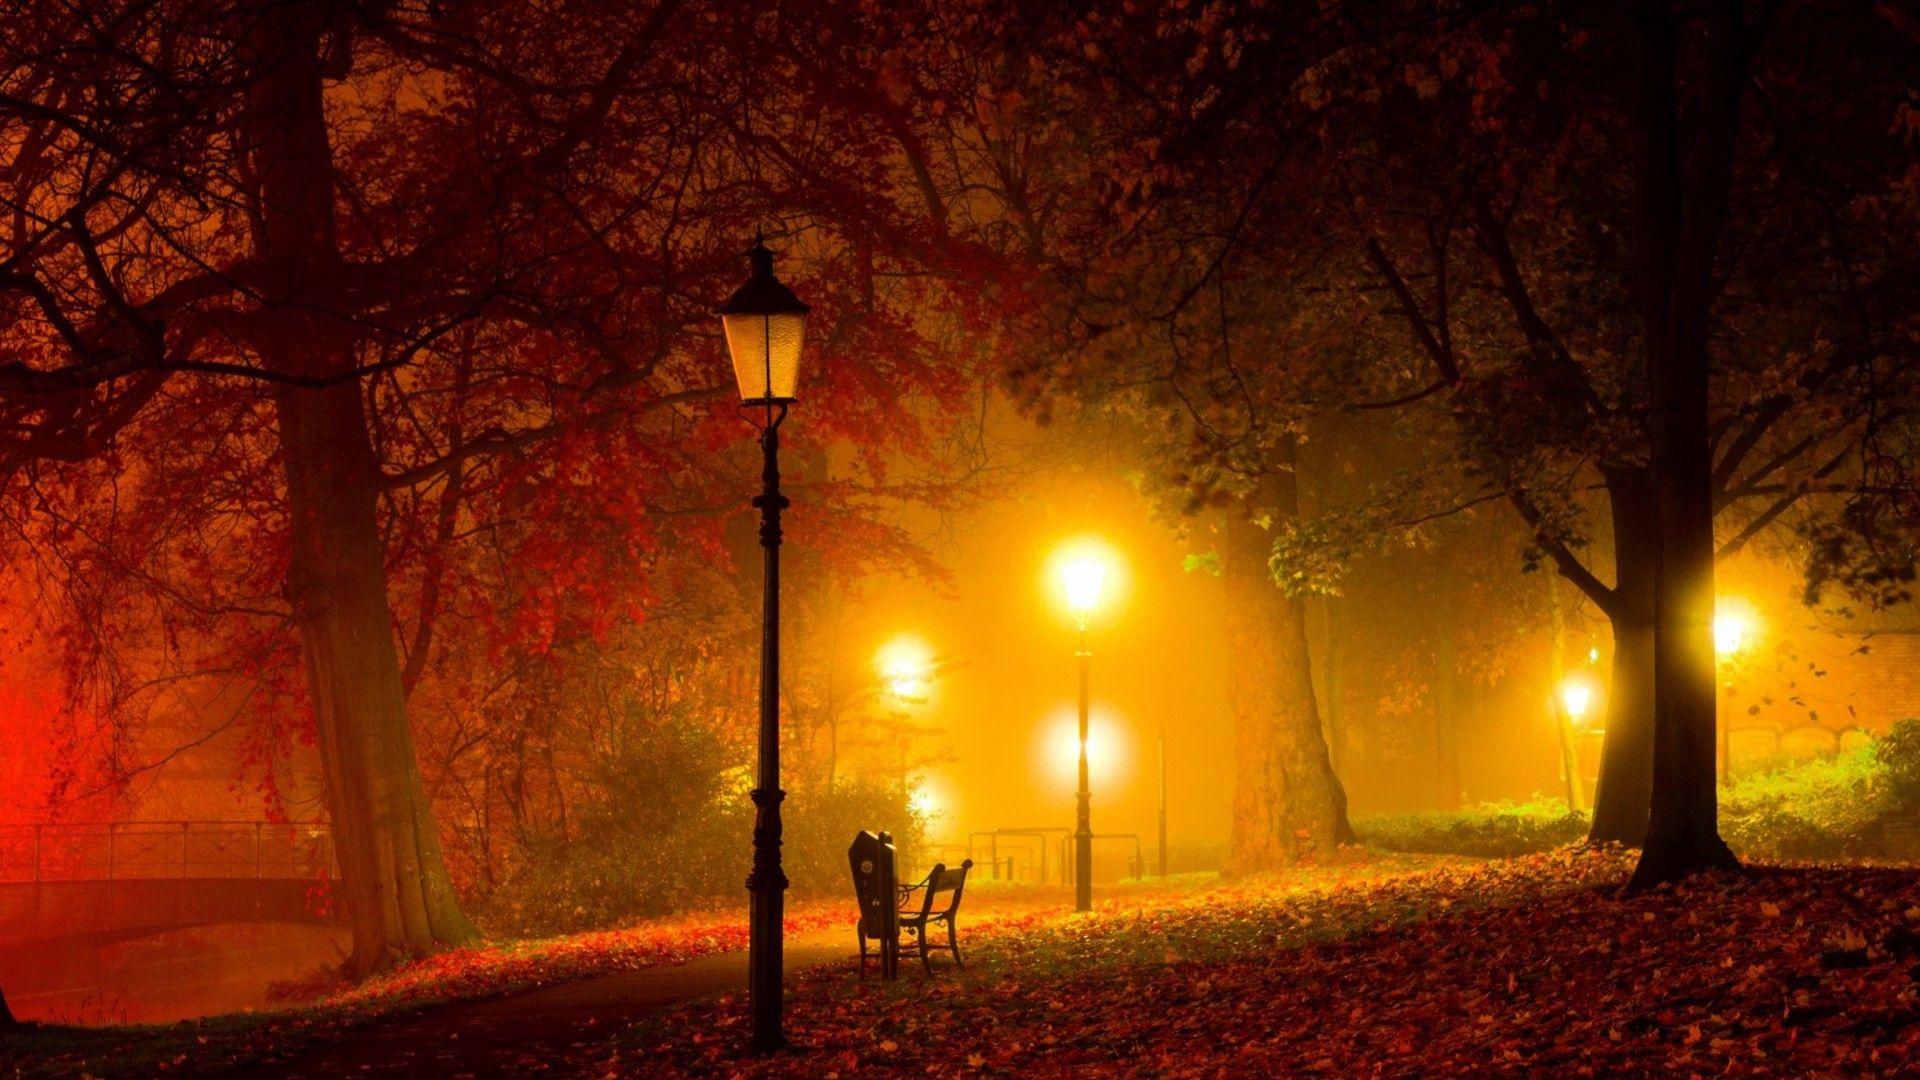 Forest: Lights Warm Park Bench Night Lamps Trees Green Forest